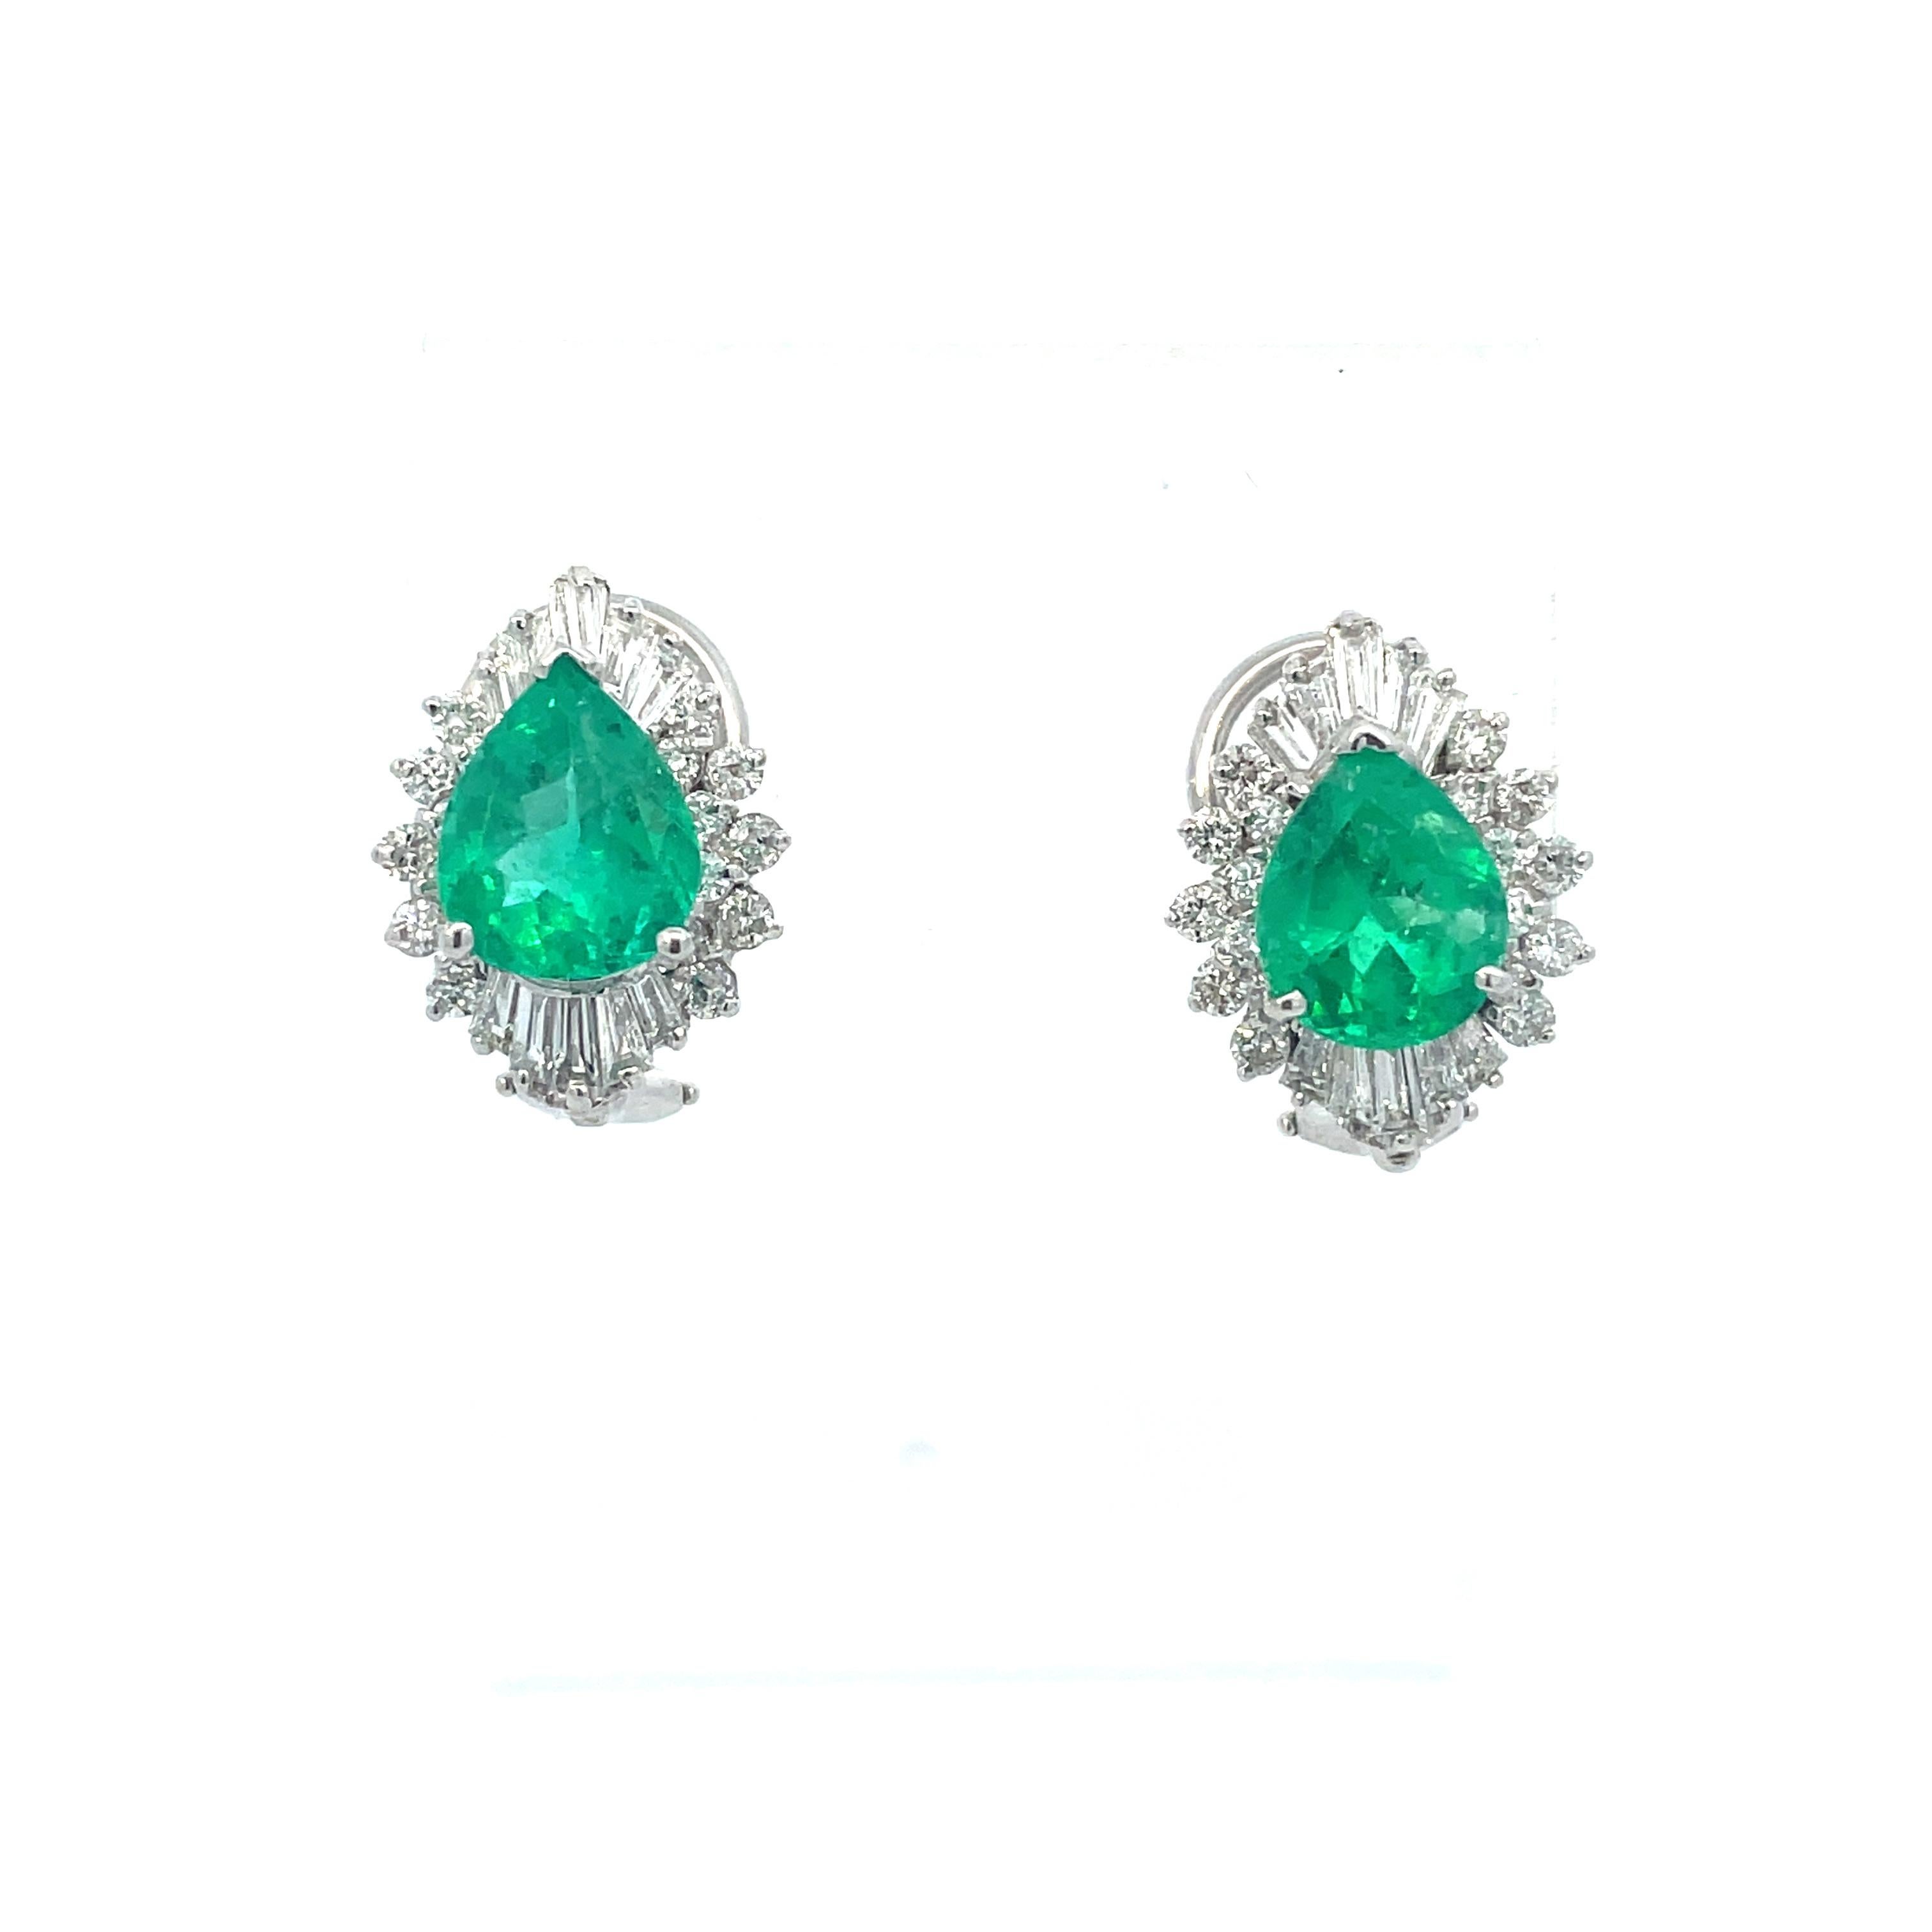 This is an impressive pair of outstanding pear-shaped Emerald earrings crafted in 14K white gold and surrounded by a sparkling burst of baguette and round diamonds. The breathtaking stones in these exquisite earrings--together weighing in at an